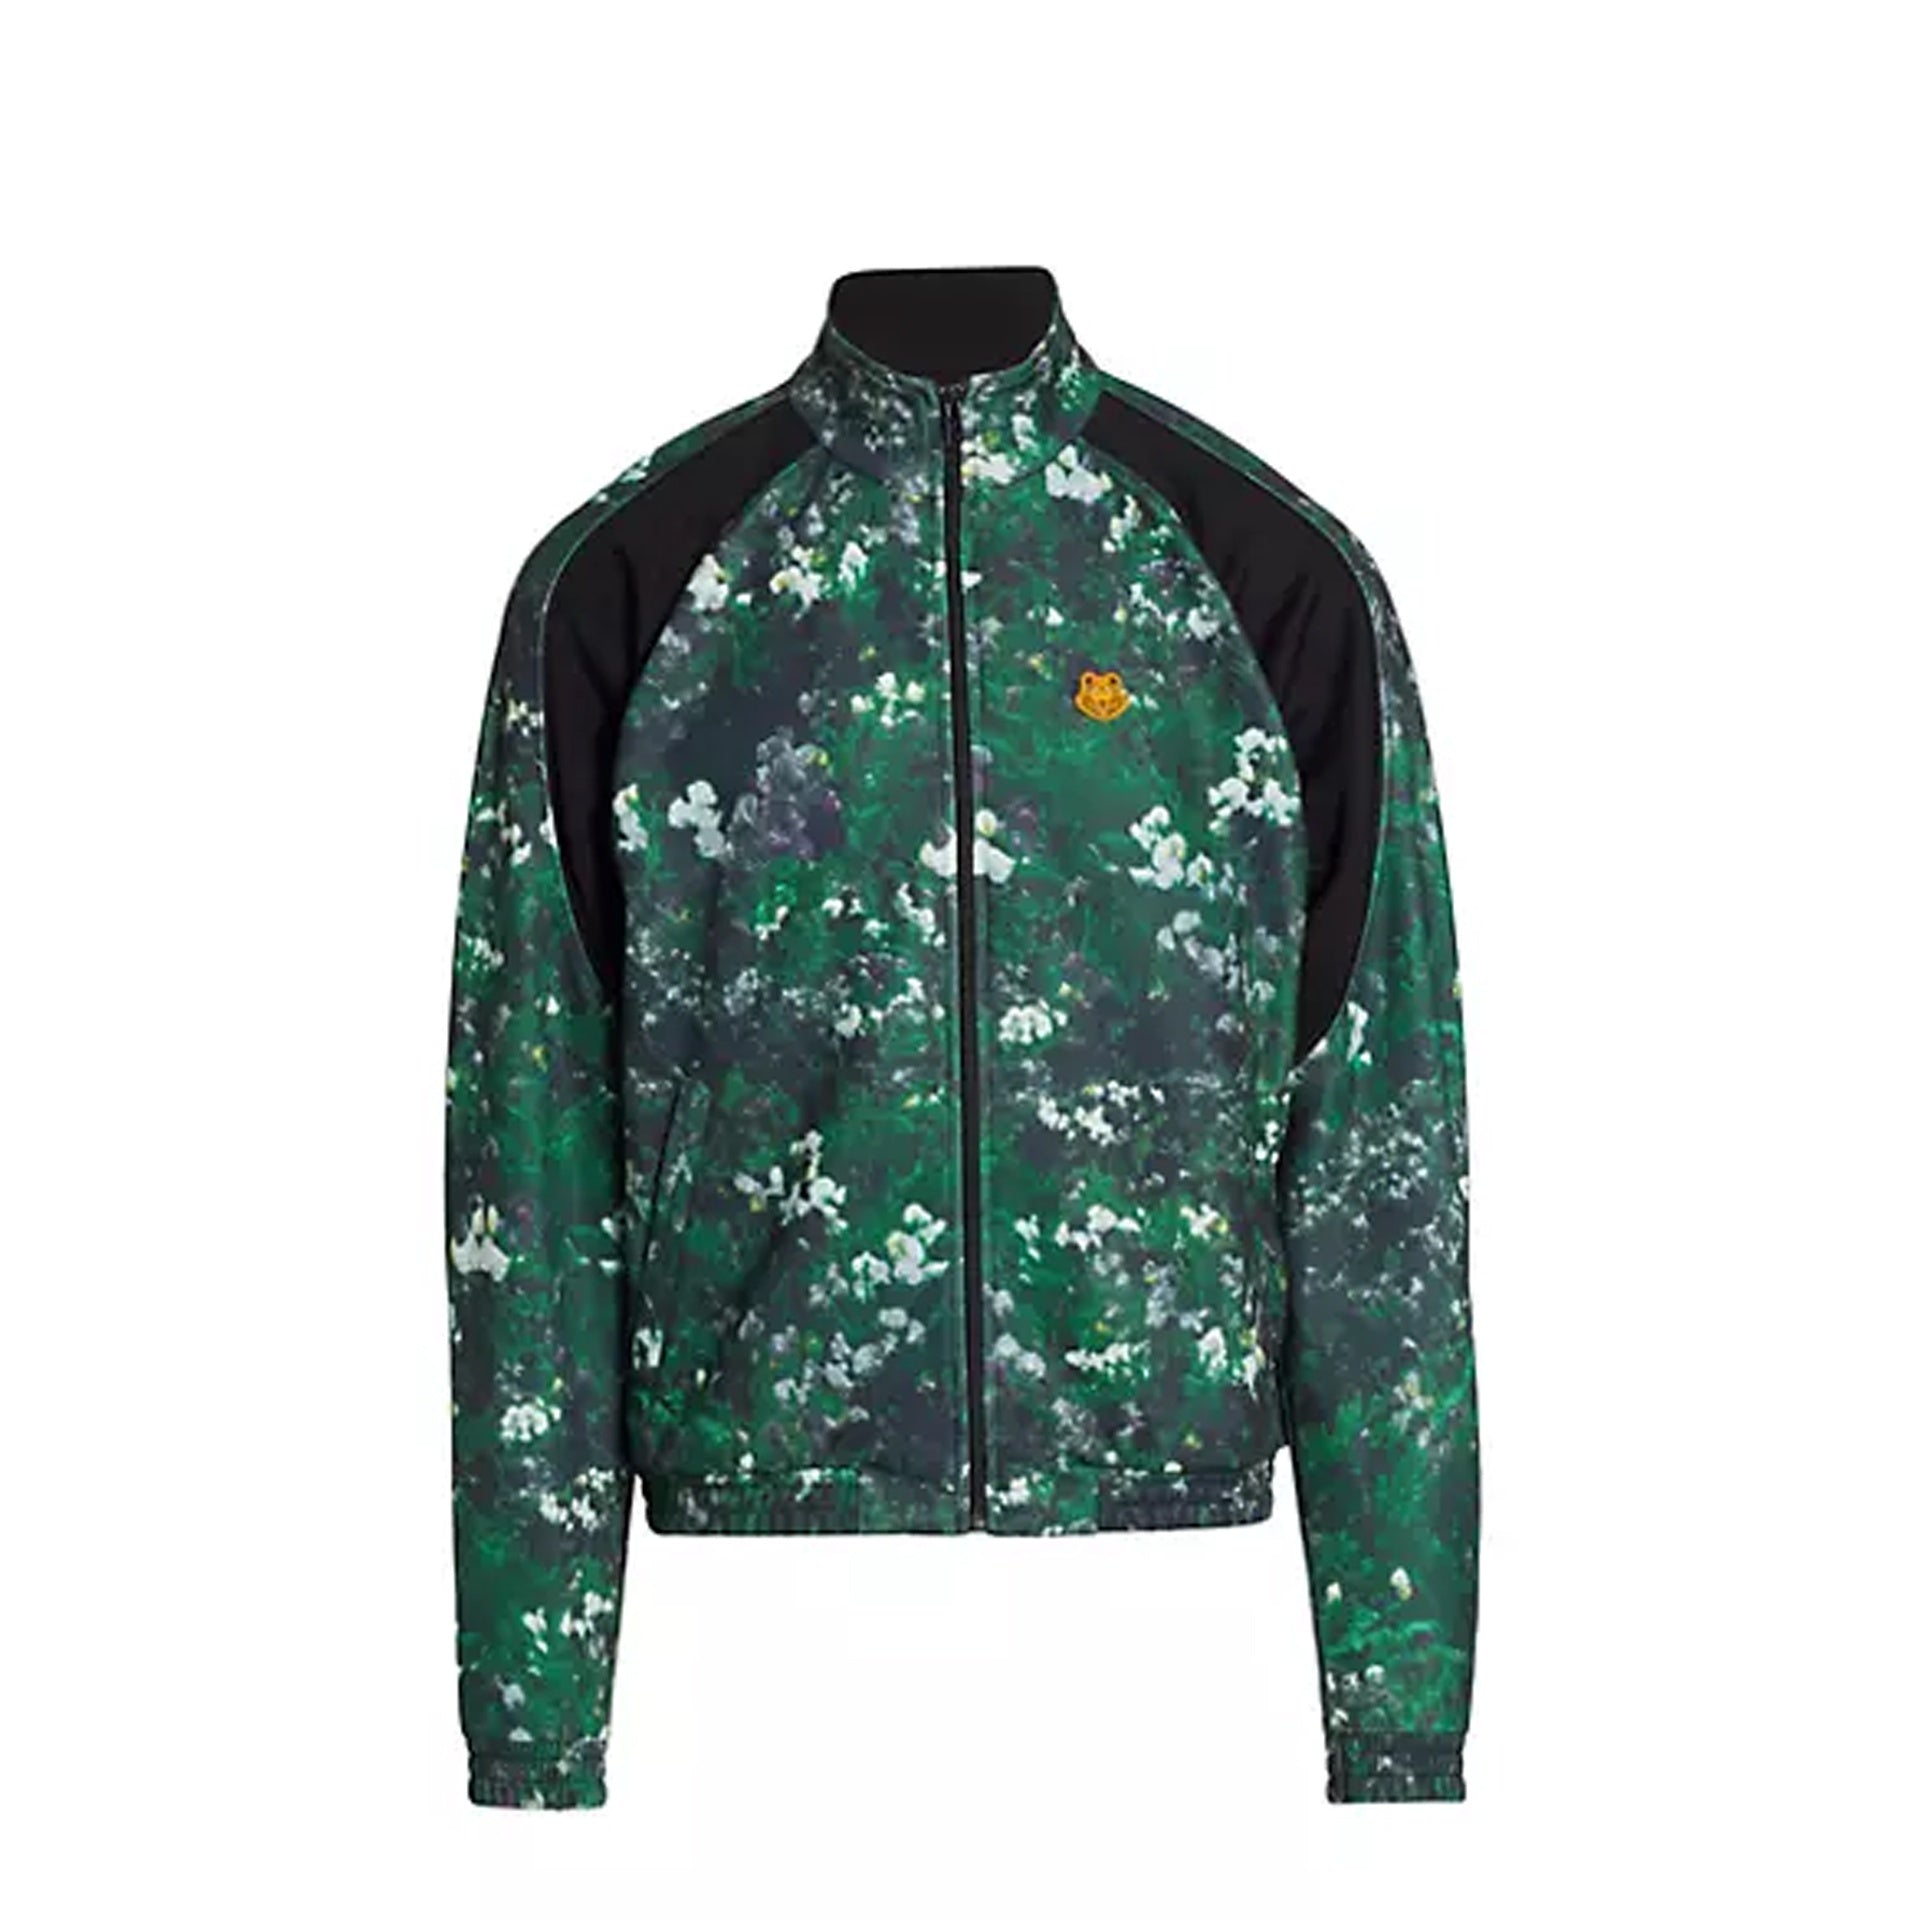 KENZO-OUTLET-SALE-Kenzo-Printed-Track-Jacket-Jacken-Mantel-GREEN-L-ARCHIVE-COLLECTION.jpg